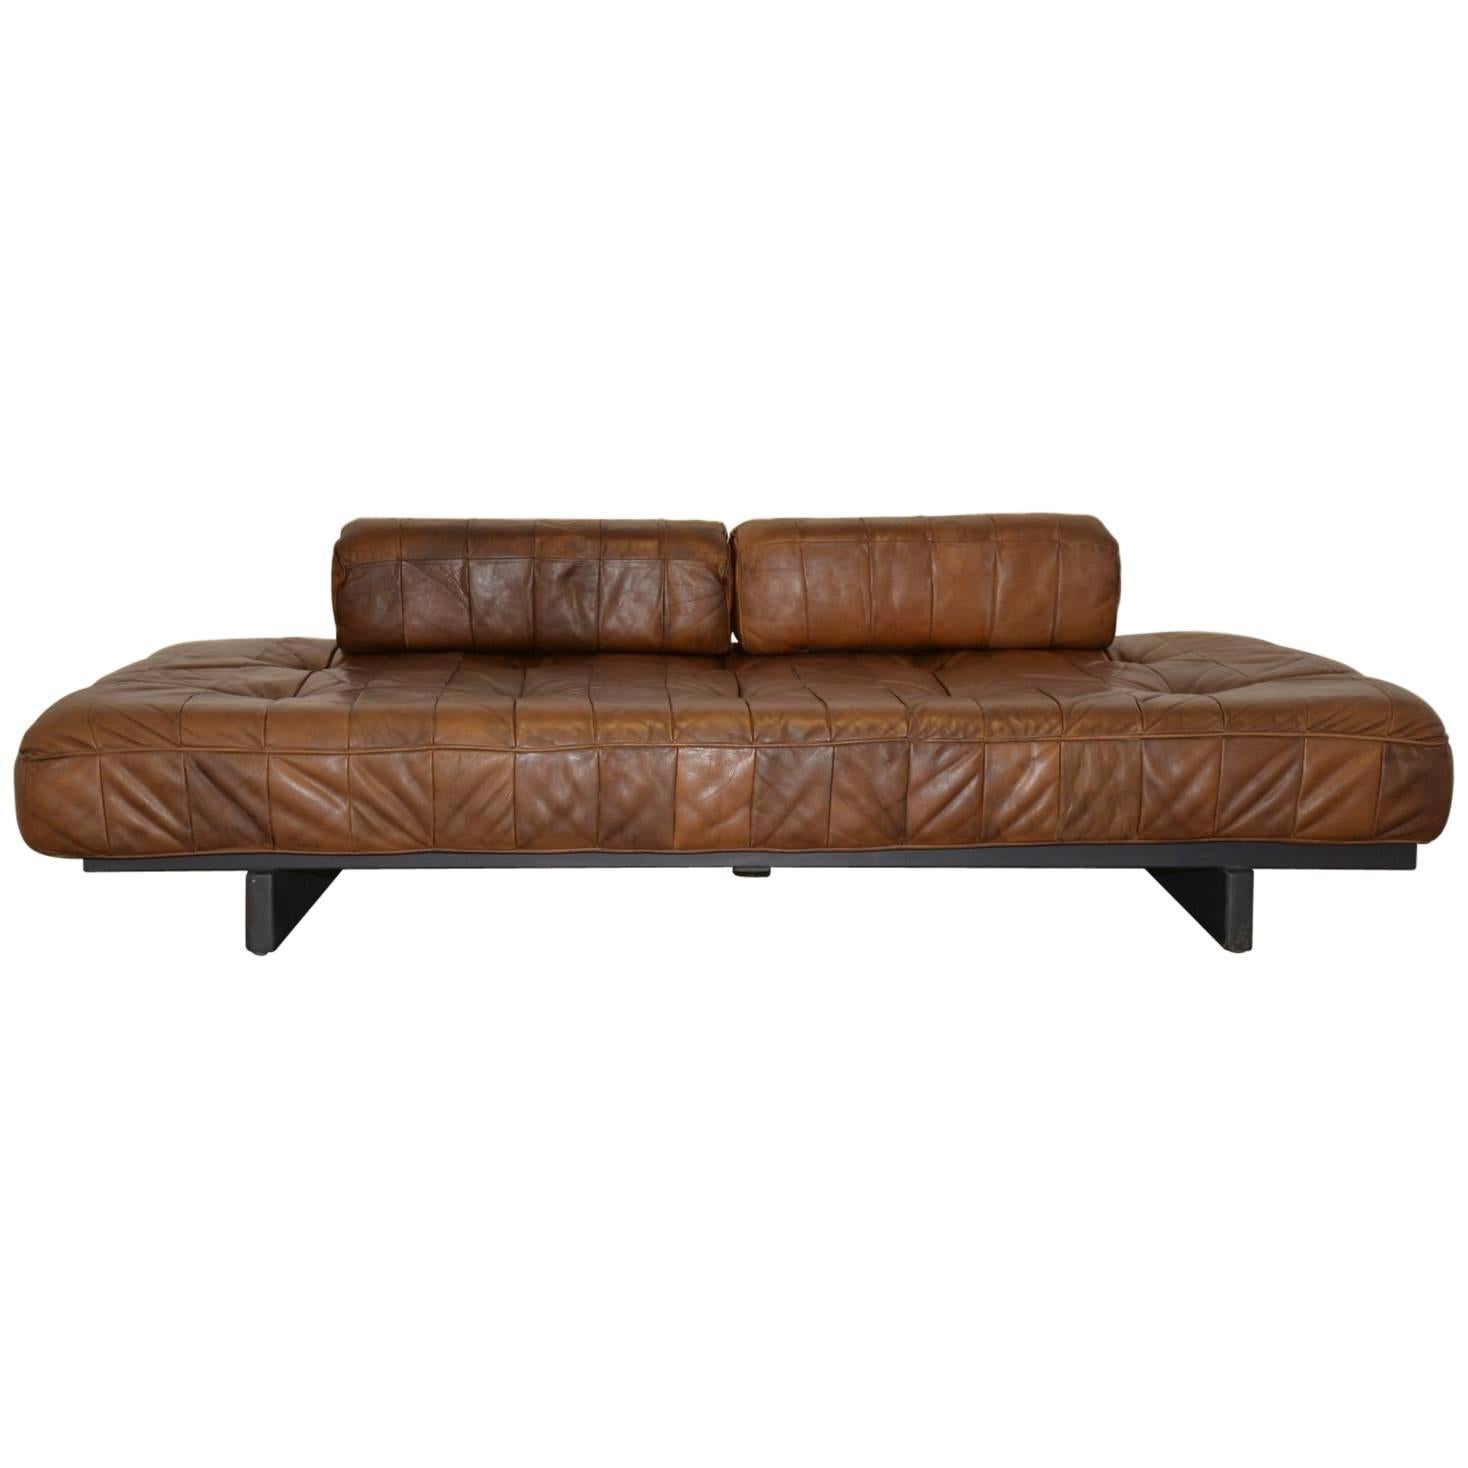 Vintage Swiss de Sede DS 80 Leather Daybed, 1960s